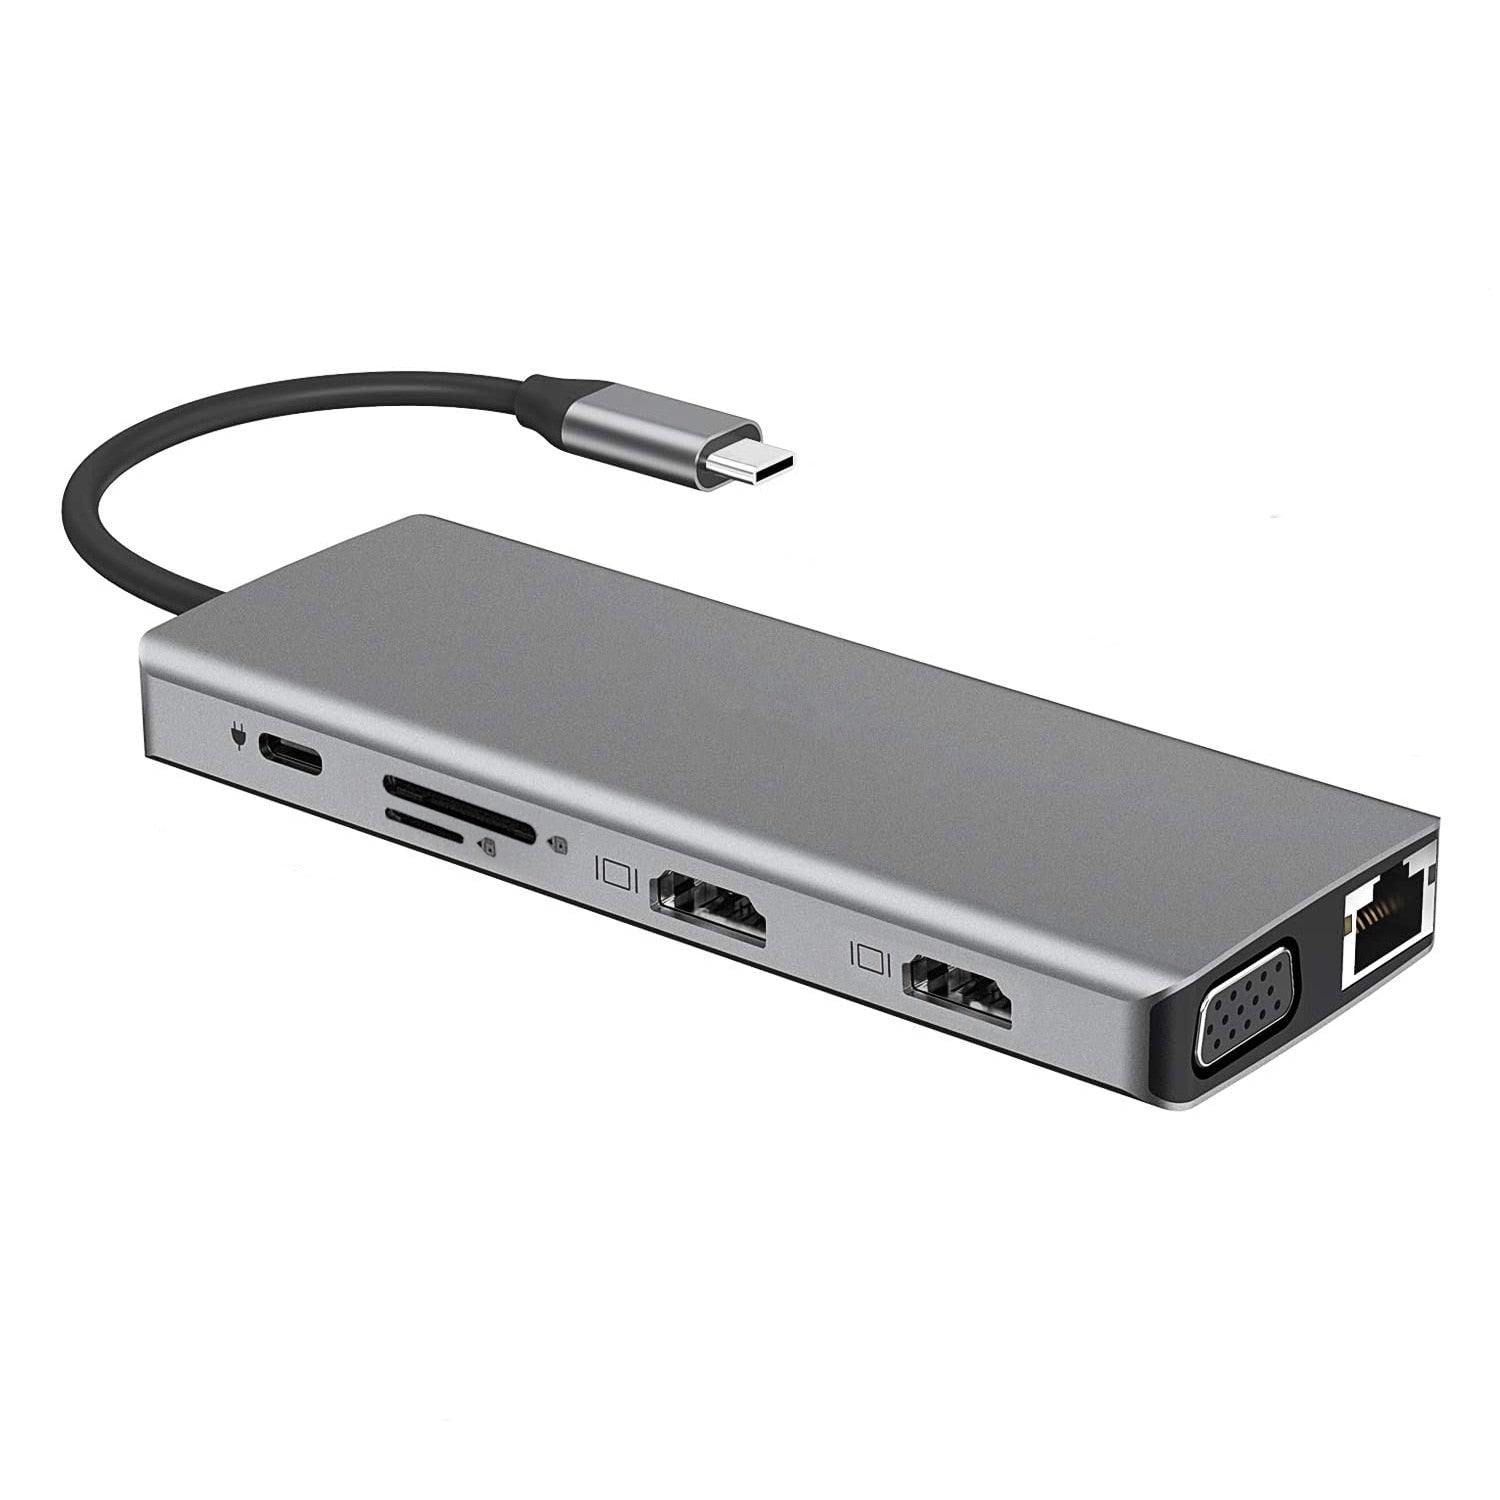 12 in 1 MST for USB C HUB Type C Dock Station 2 HDMI VGA Ethernet USB C 100W PD for MacBook/Dell/Surface/HP/Lenovo/Surface/Dell